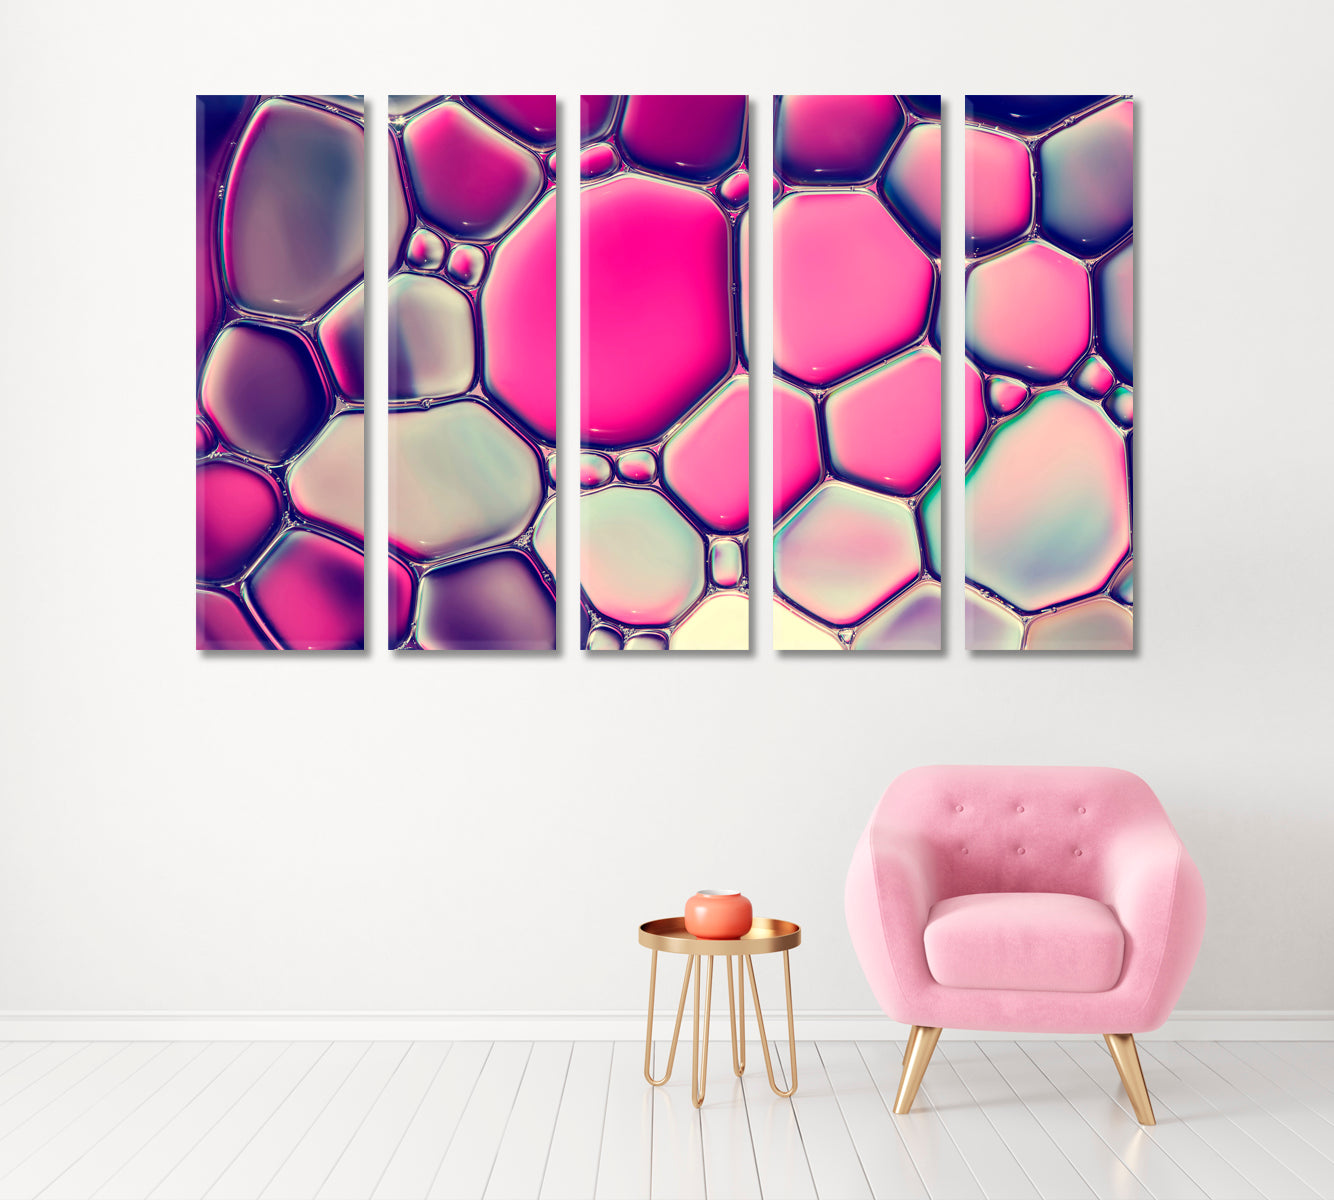 Stunning Abstract Water Bubbles Canvas Print ArtLexy 5 Panels 36"x24" inches 